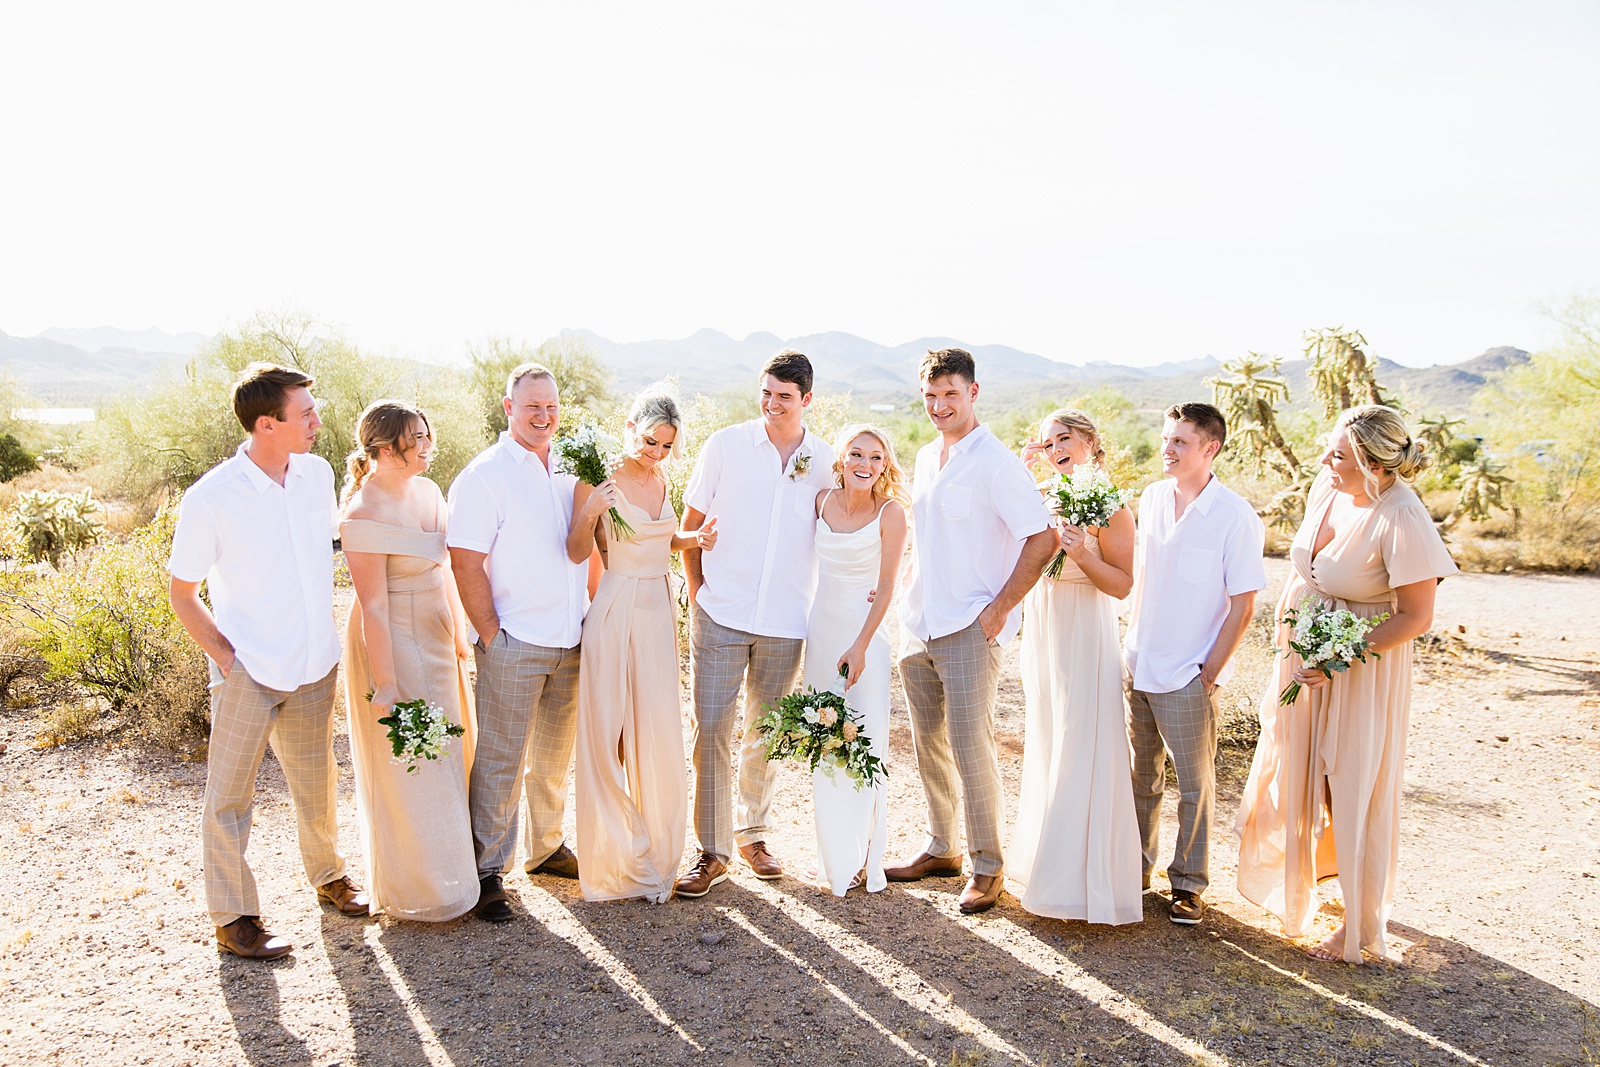 Bridal party laughing together at Superstition Mountain Micro wedding by Lost Dutchman wedding photographer PMA Photography.